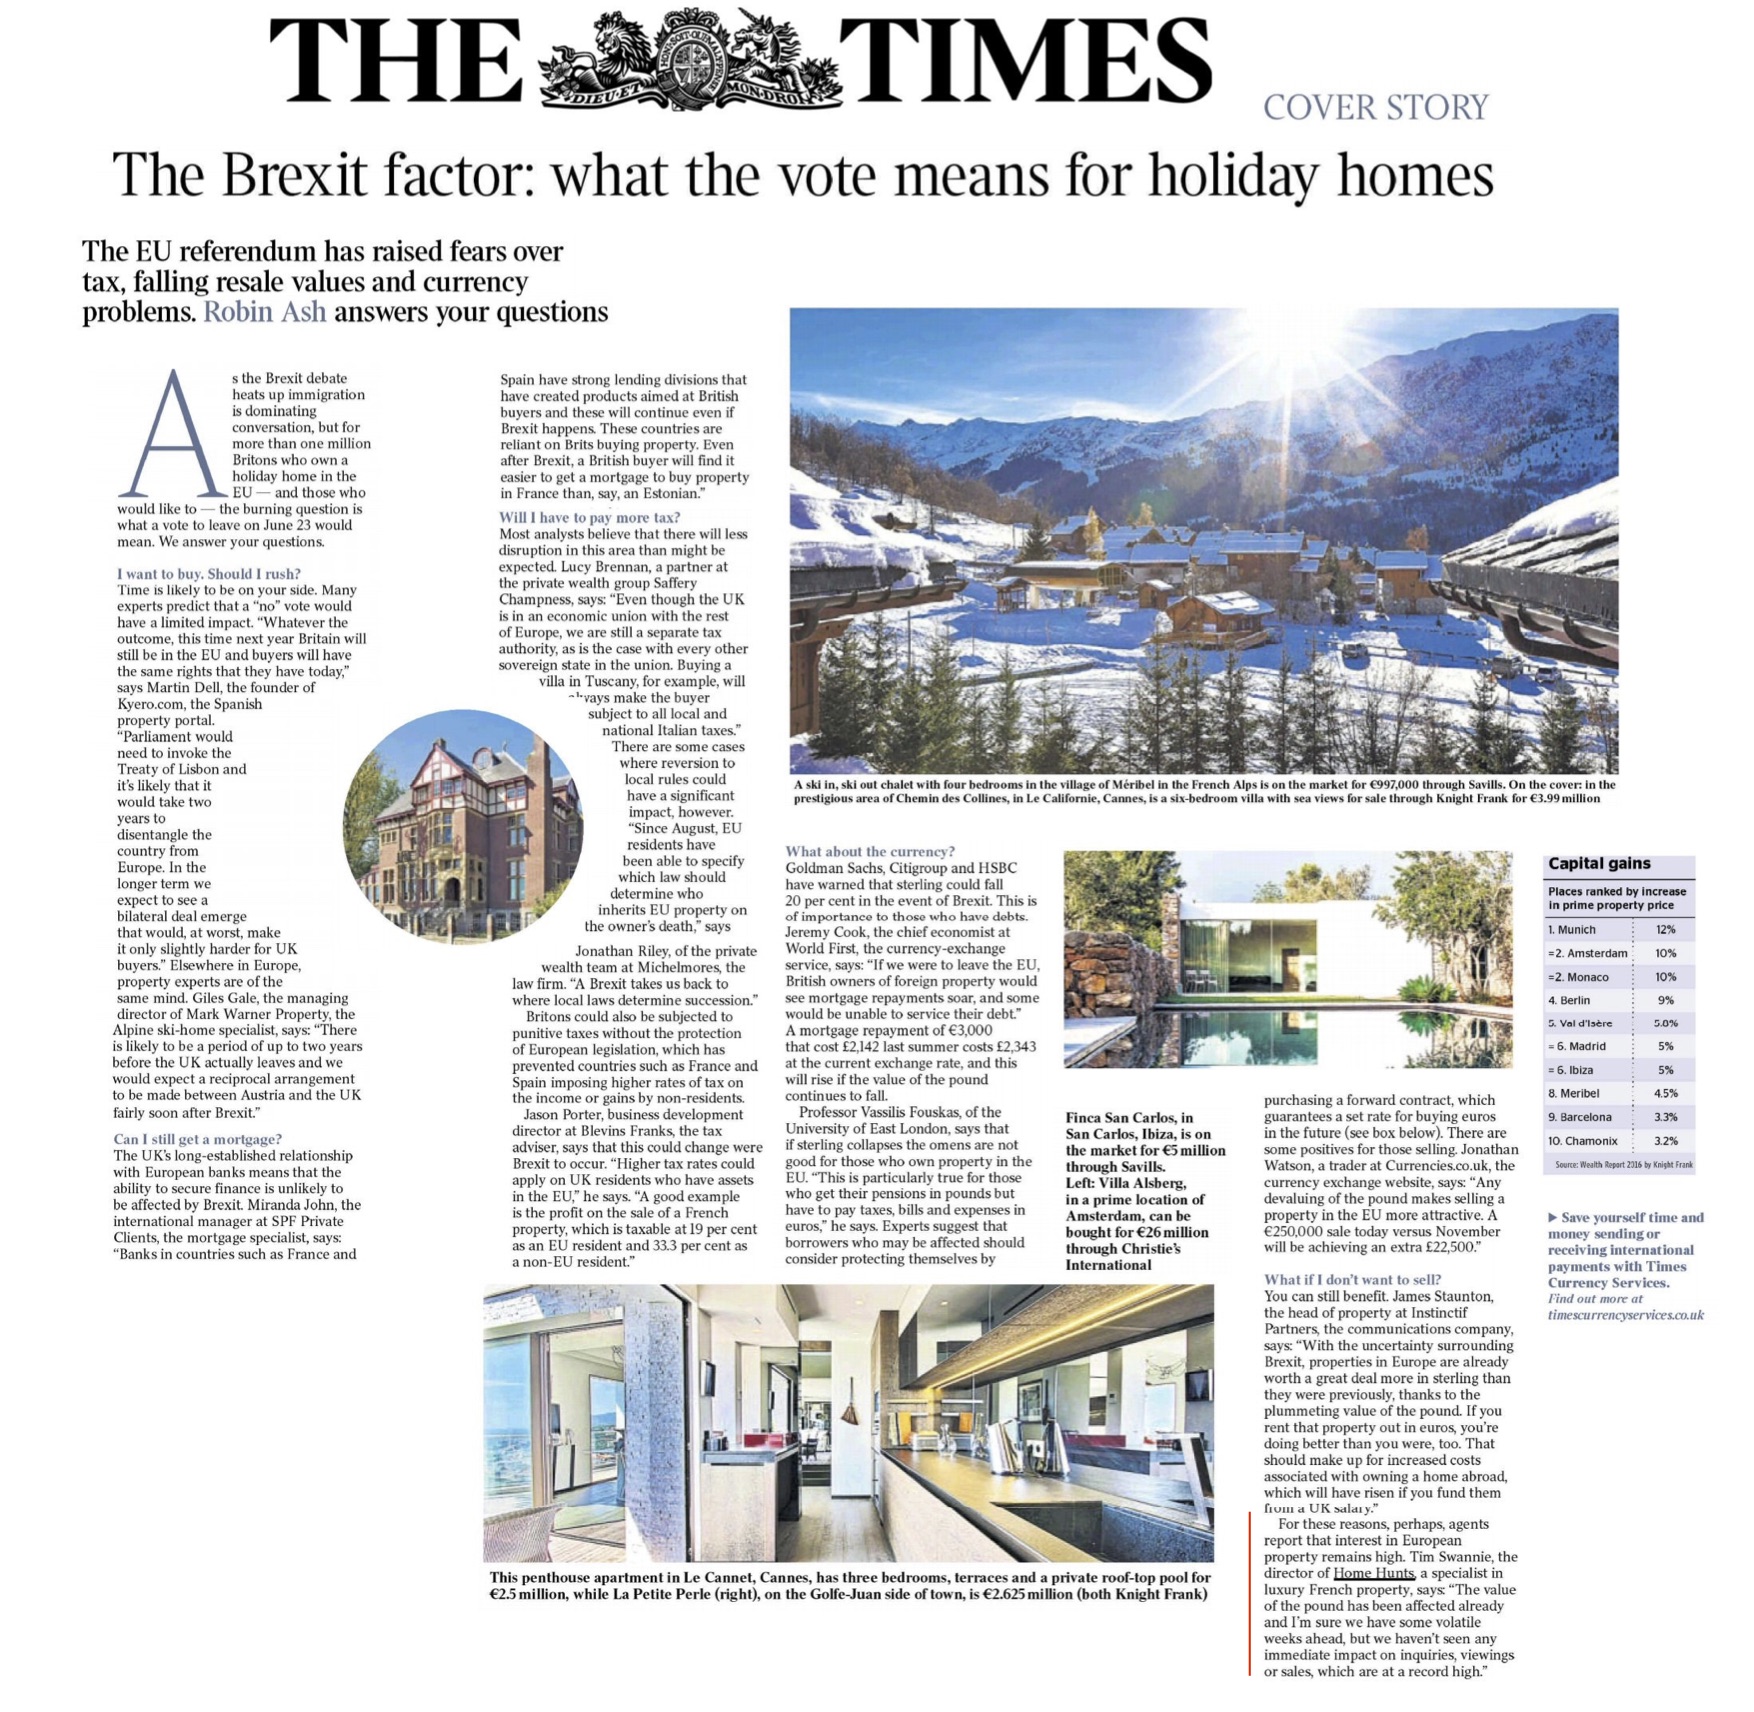 The Times – The Brexit Factor – What the vote means for holiday home owners